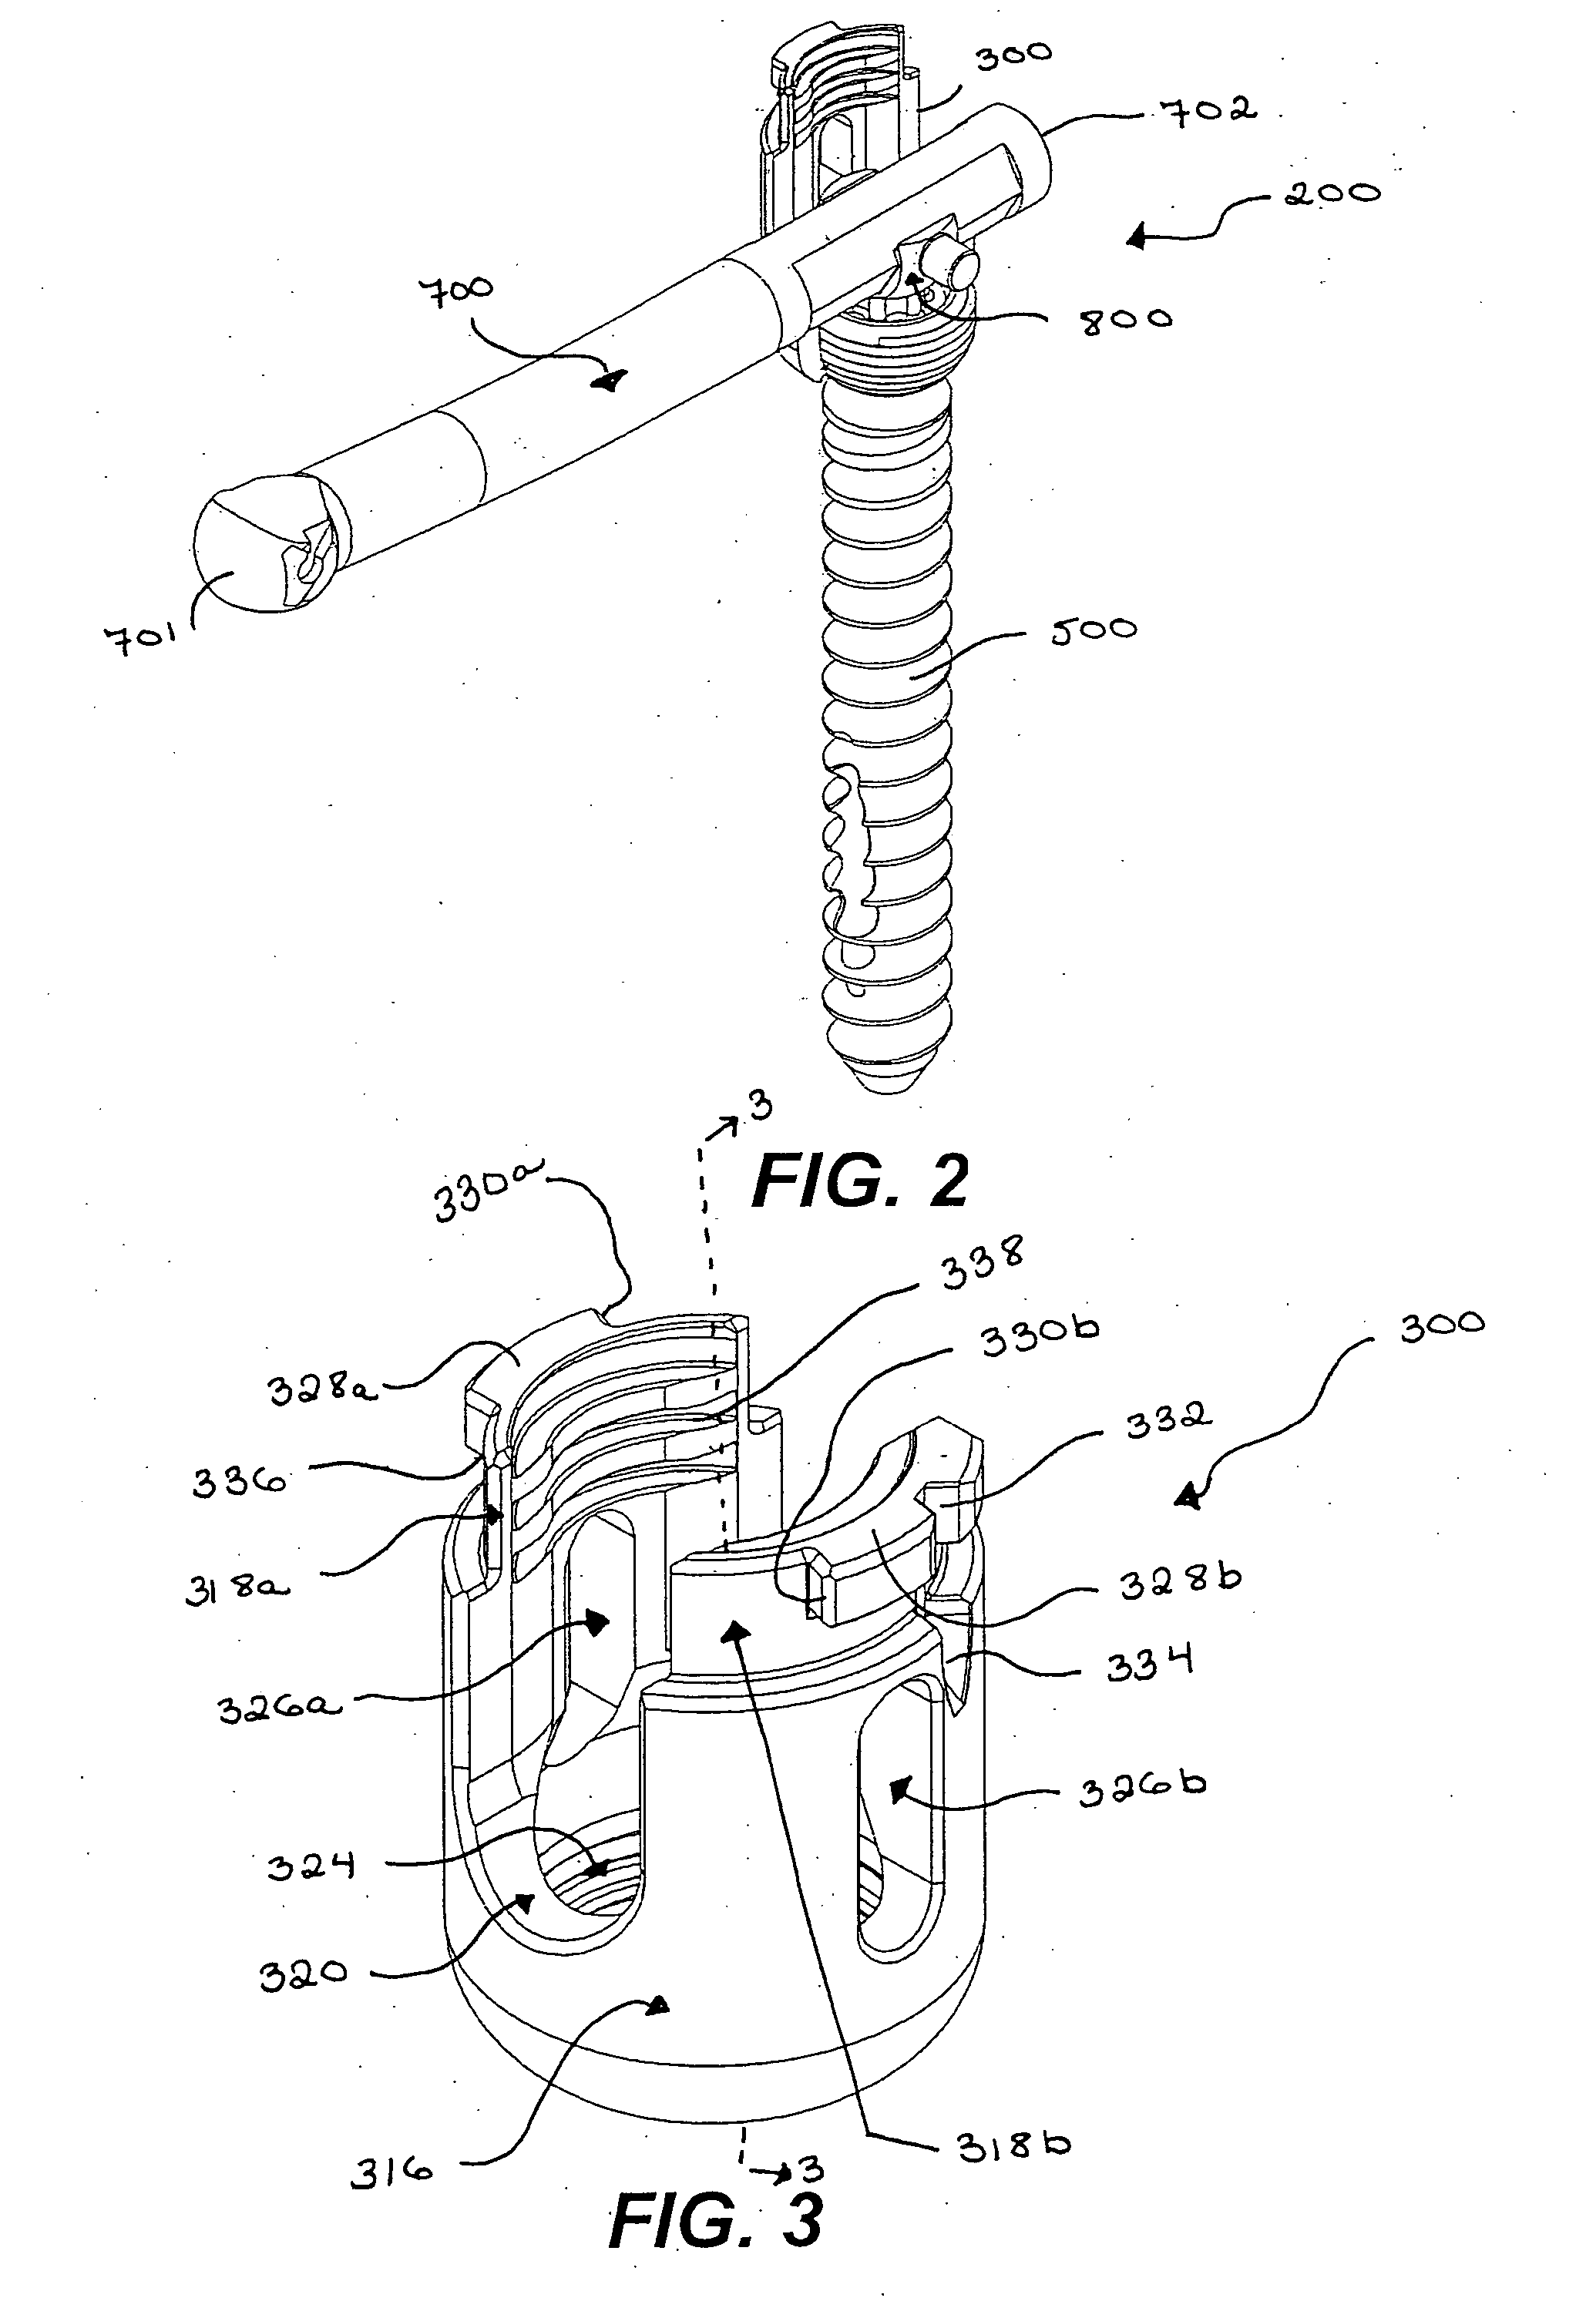 Extension for use with stabilization systems for internal structures